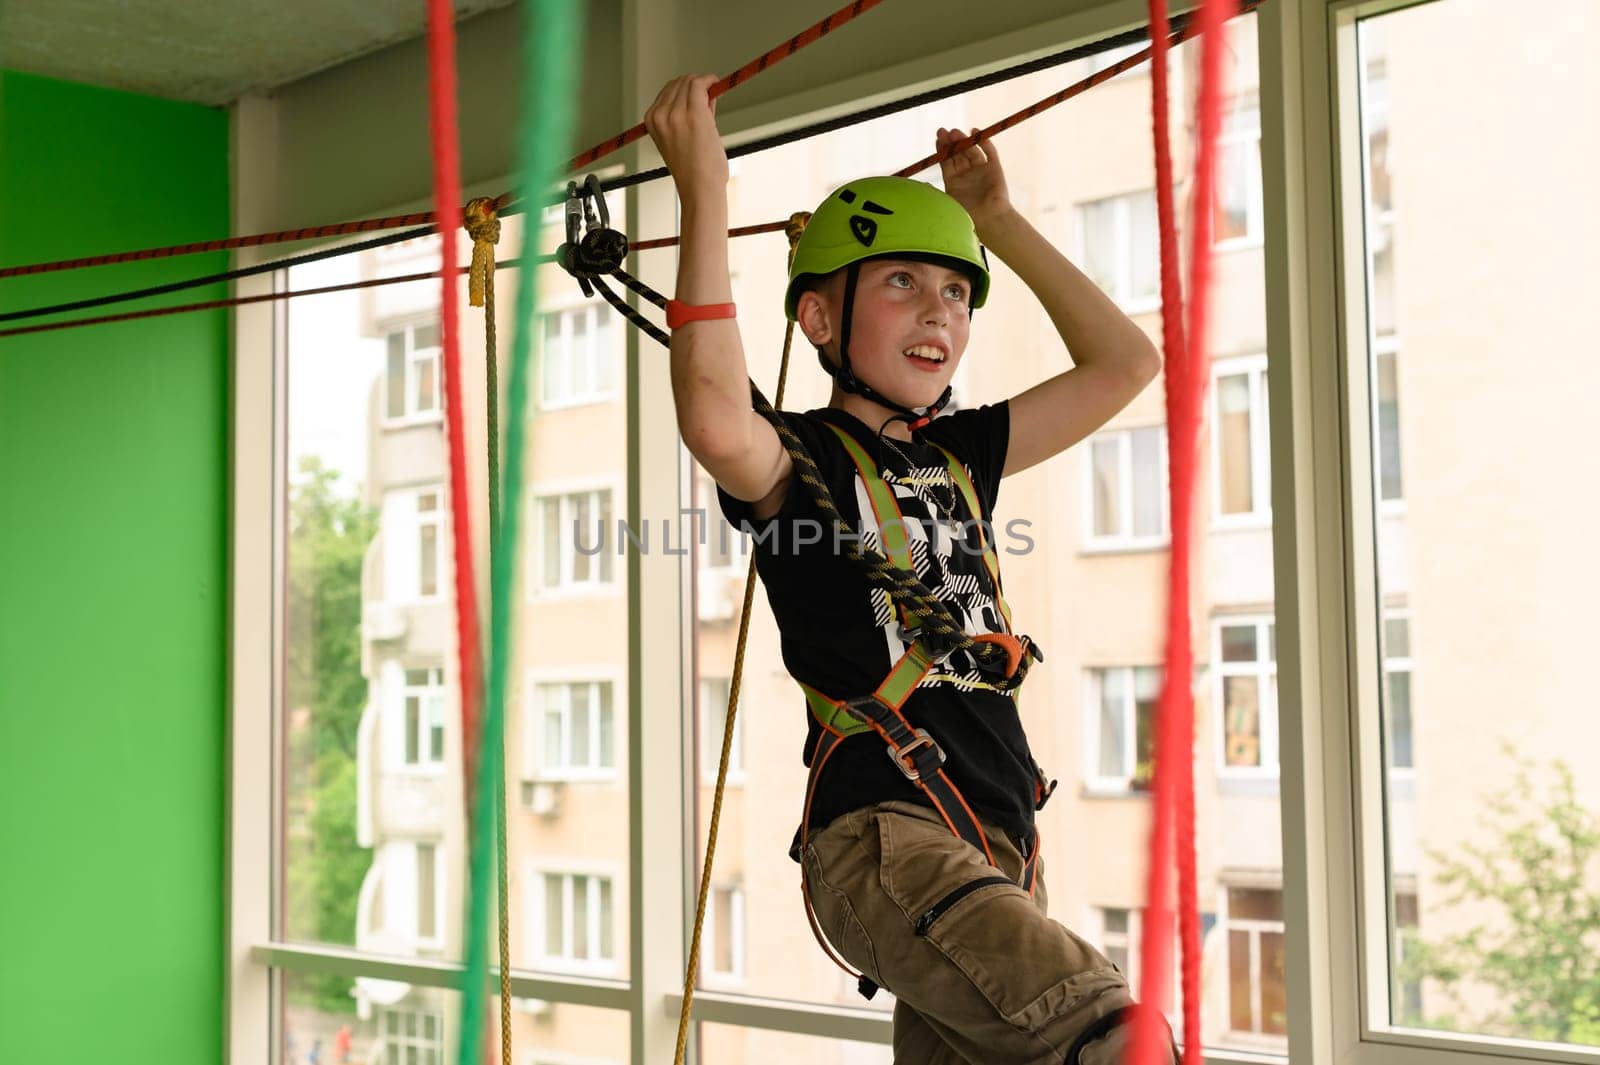 Ropeway is one of the types of physical development for children, a boy passes the ropeway in the playroom.